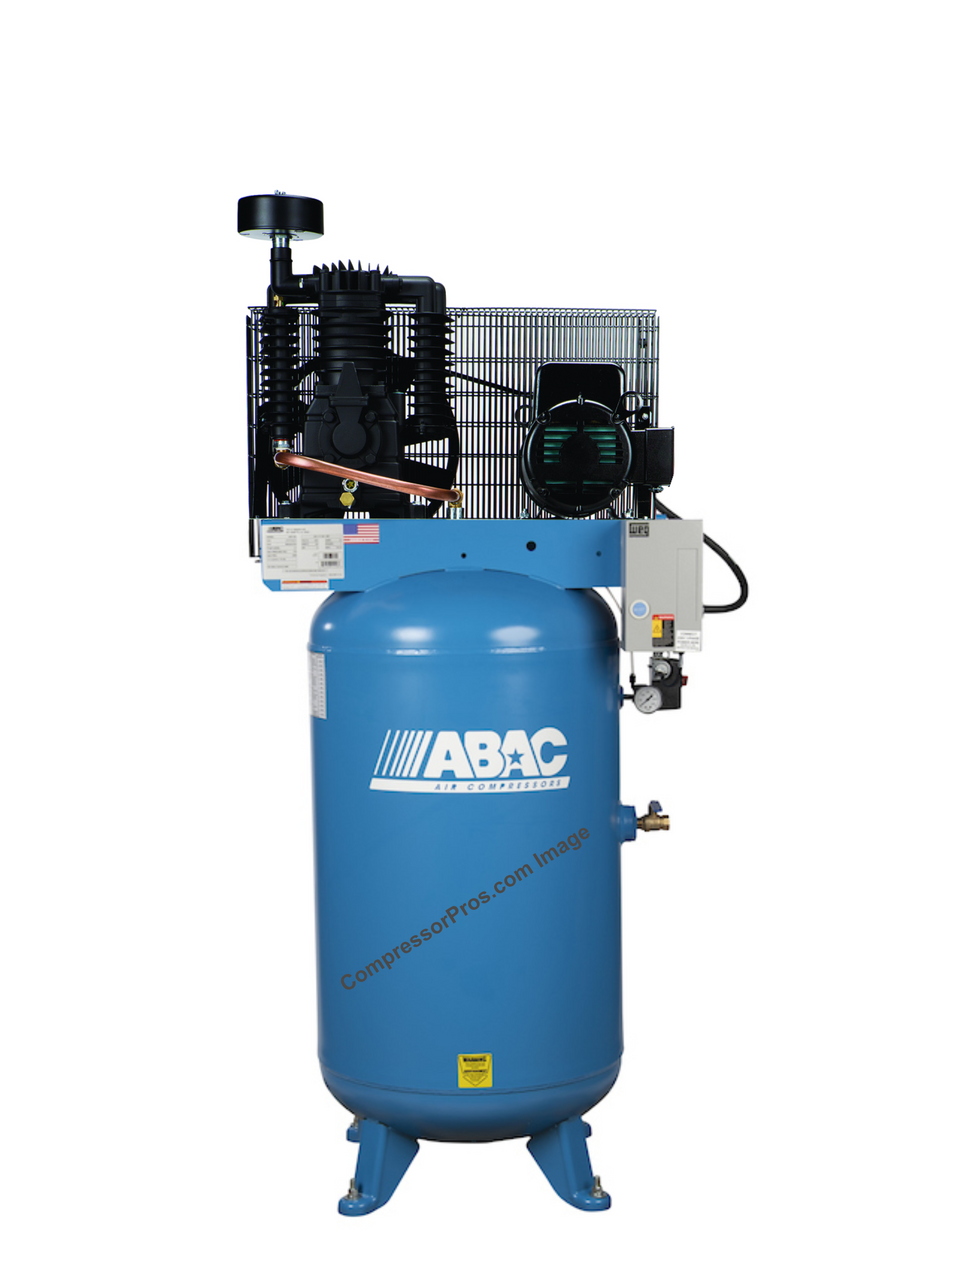 ABAC AB7-2180VFF 7.5 HP 230 Volt Single Phase Two Stage 80 Gallon Vertical Full Featured Air Compressor